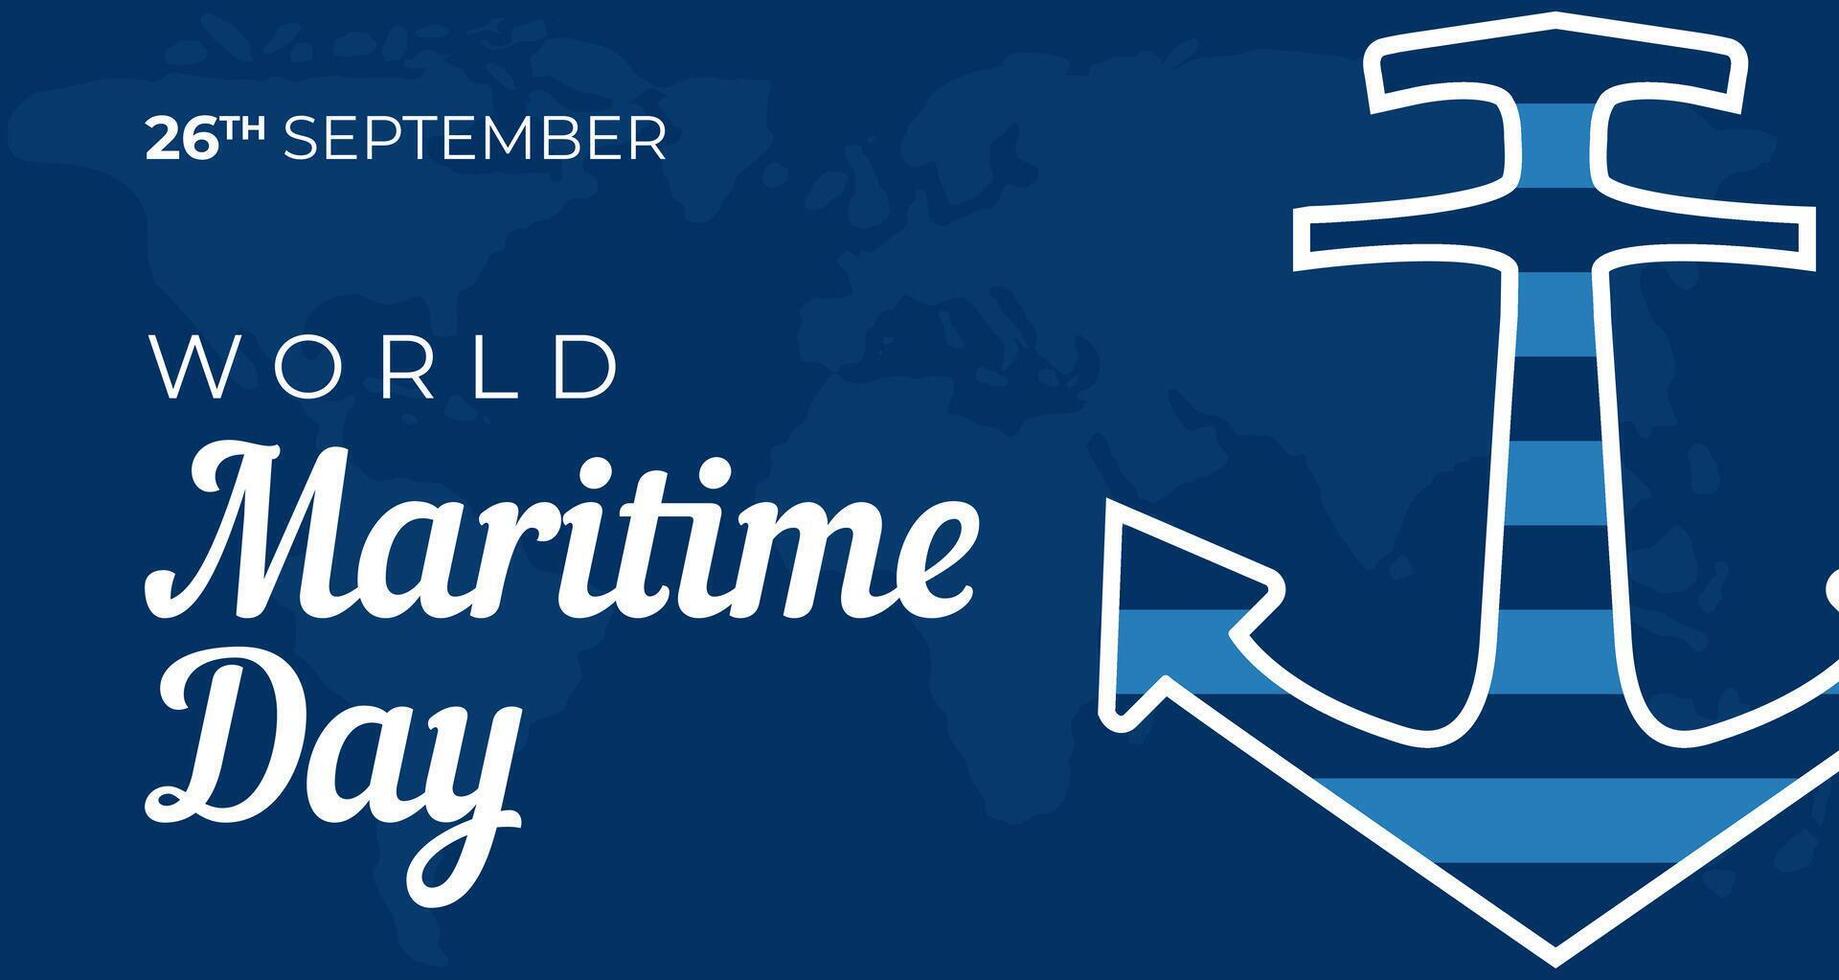 World Maritime Day Background Illustration with Anchor vector